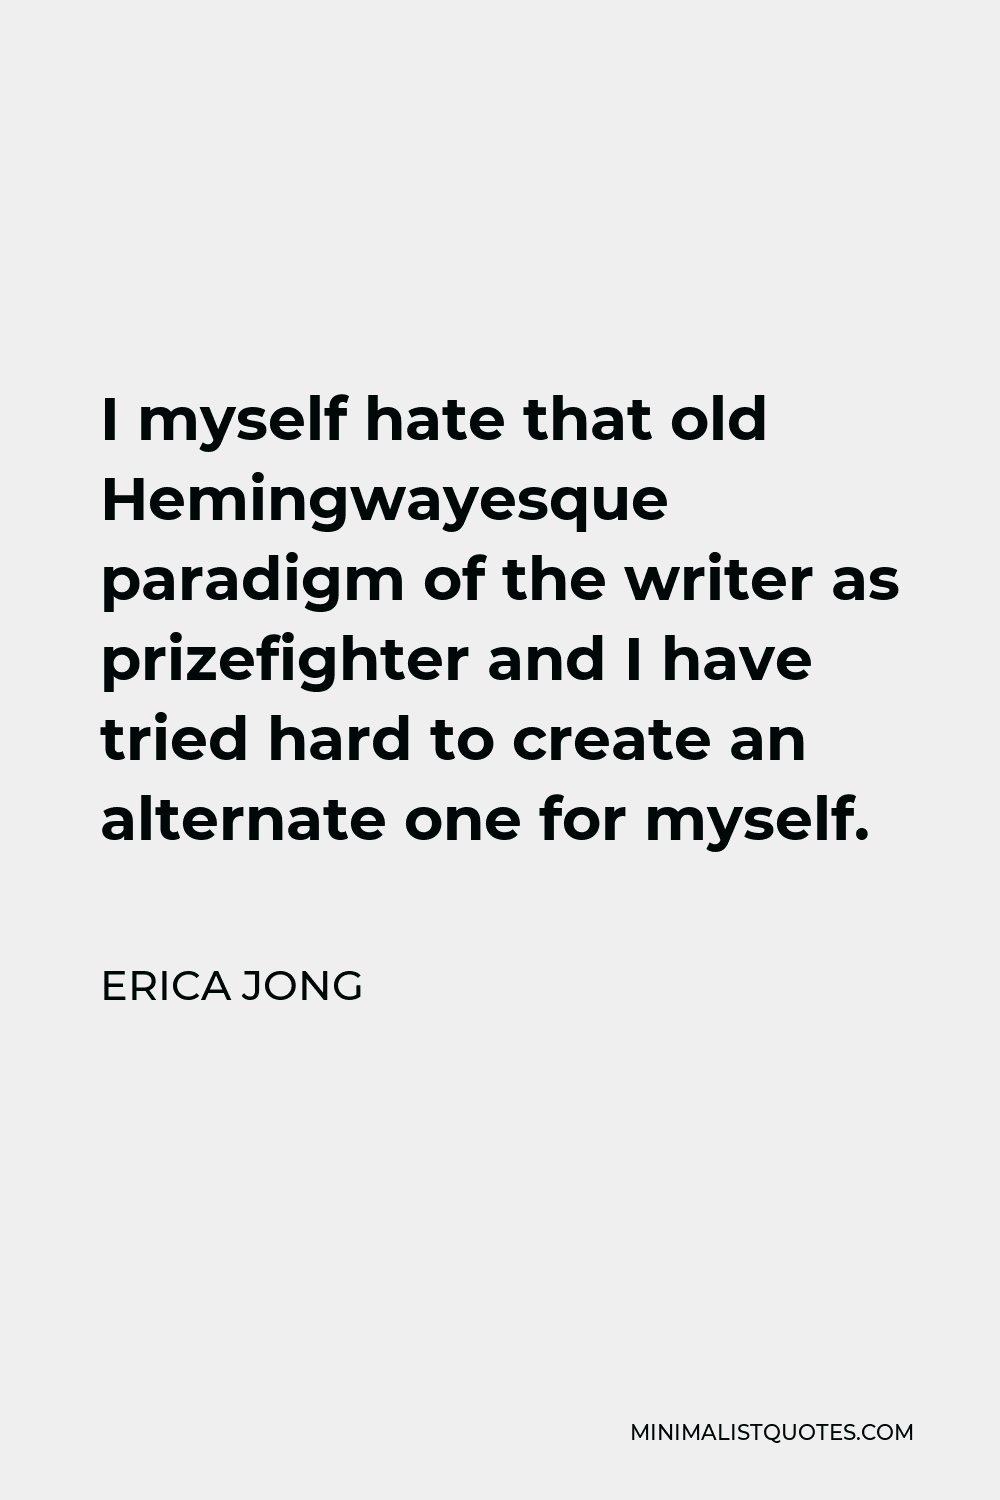 Erica Jong Quote - I myself hate that old Hemingwayesque paradigm of the writer as prizefighter and I have tried hard to create an alternate one for myself.